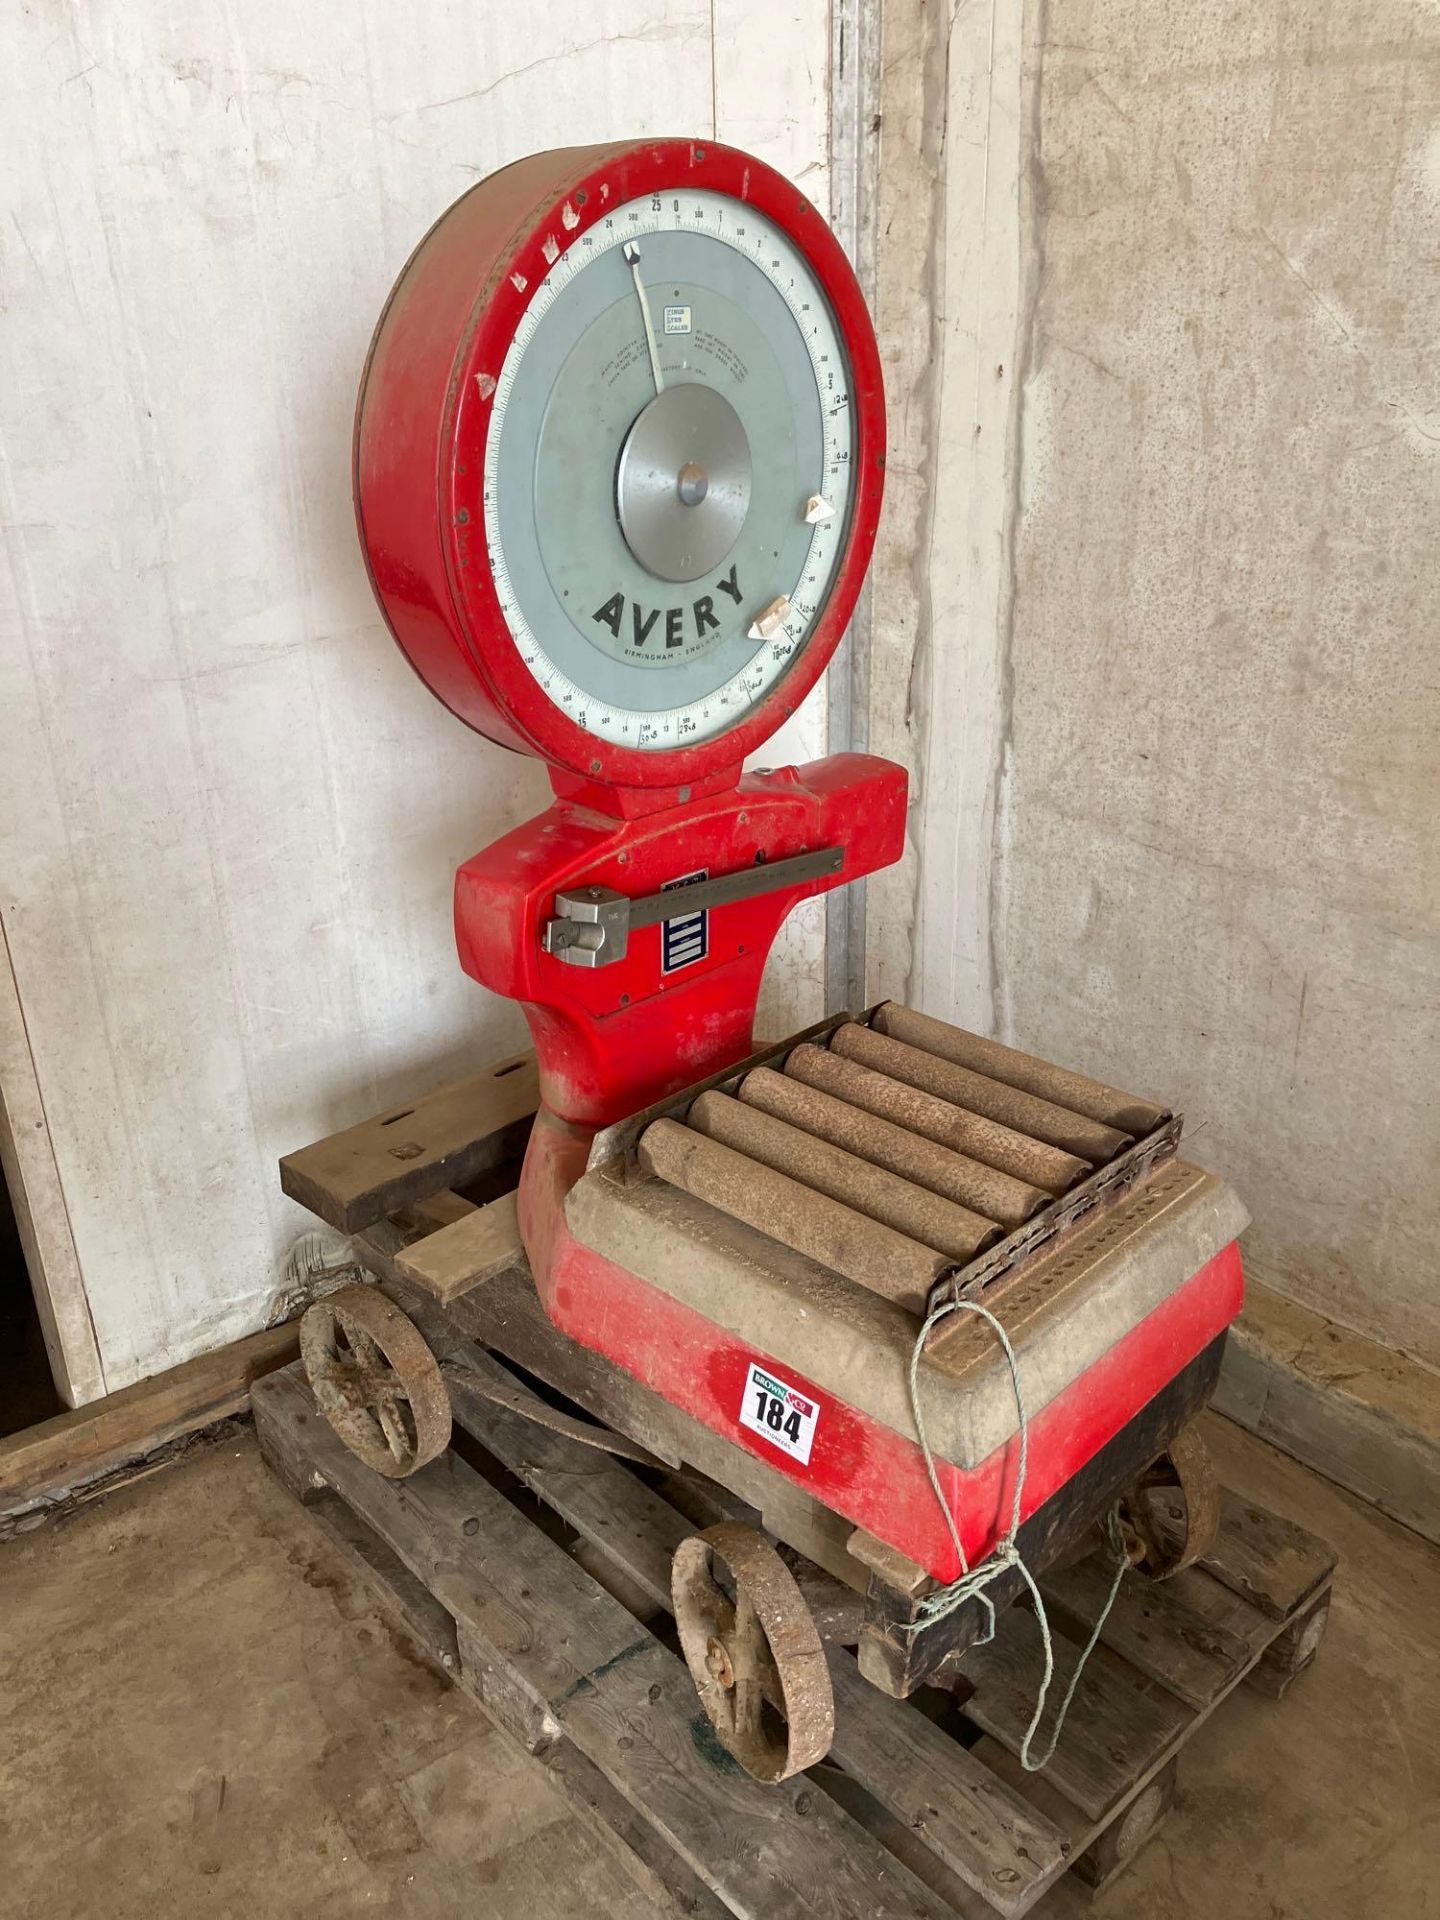 Avery 30kg scales on trolley. Model No: 3303CLB. Serial No: 641201